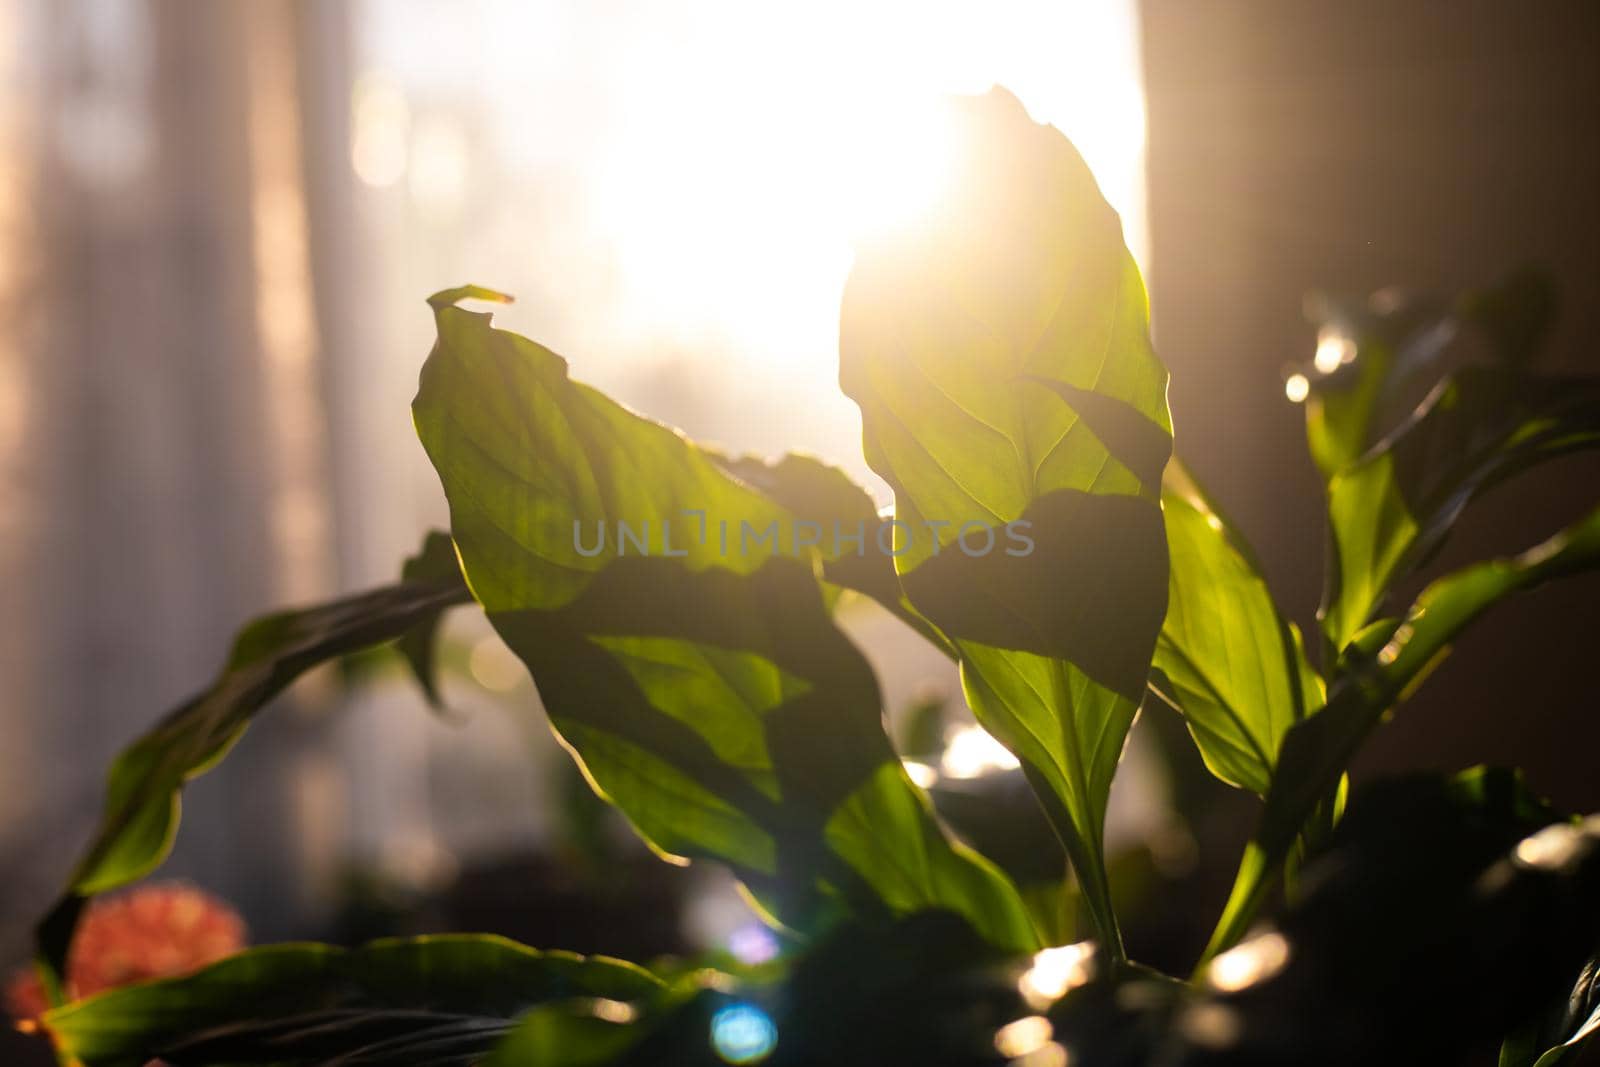 The leaves are green against the sun. Home flower. Sunlight. Light through the leaves. Nature